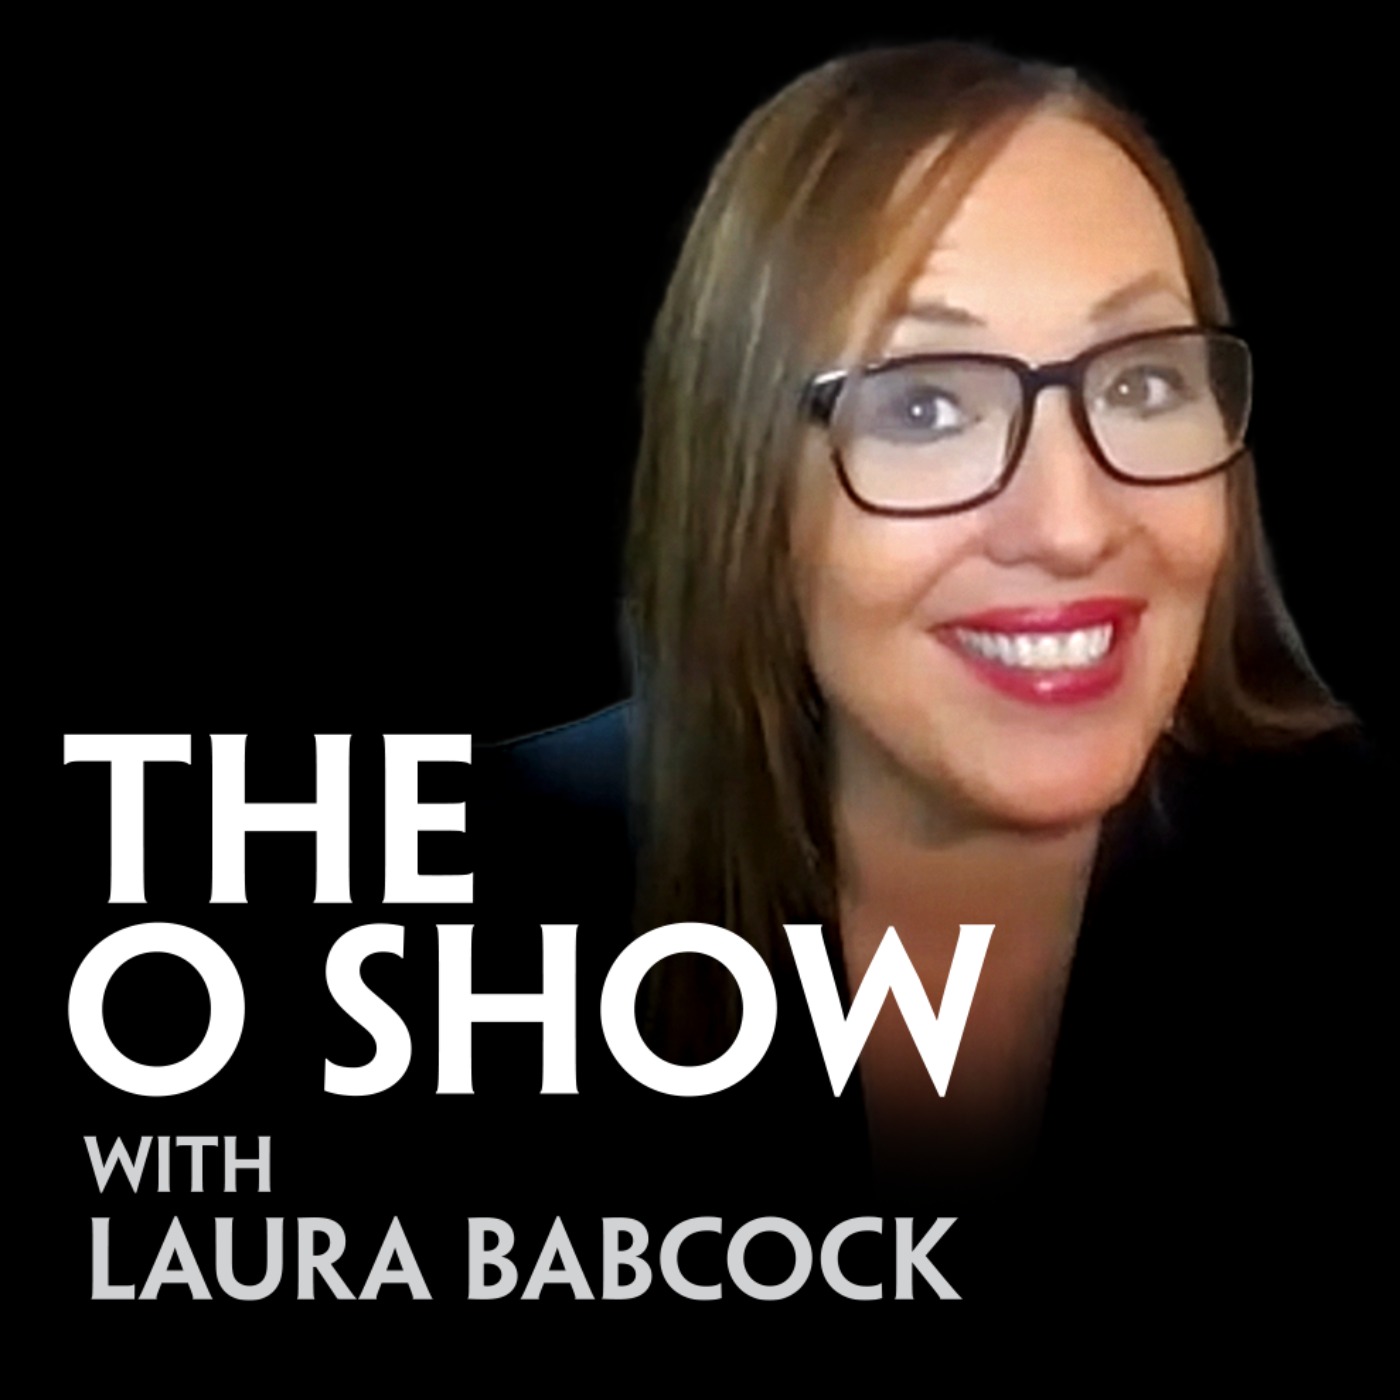 cover art for THE OSHOW WITH LAURA BABCOCK: URBANIST GIL PENALOSA ON FORD, MAYORS AND THE POLITICAL GUTS TO BUILD BETTER CITIES